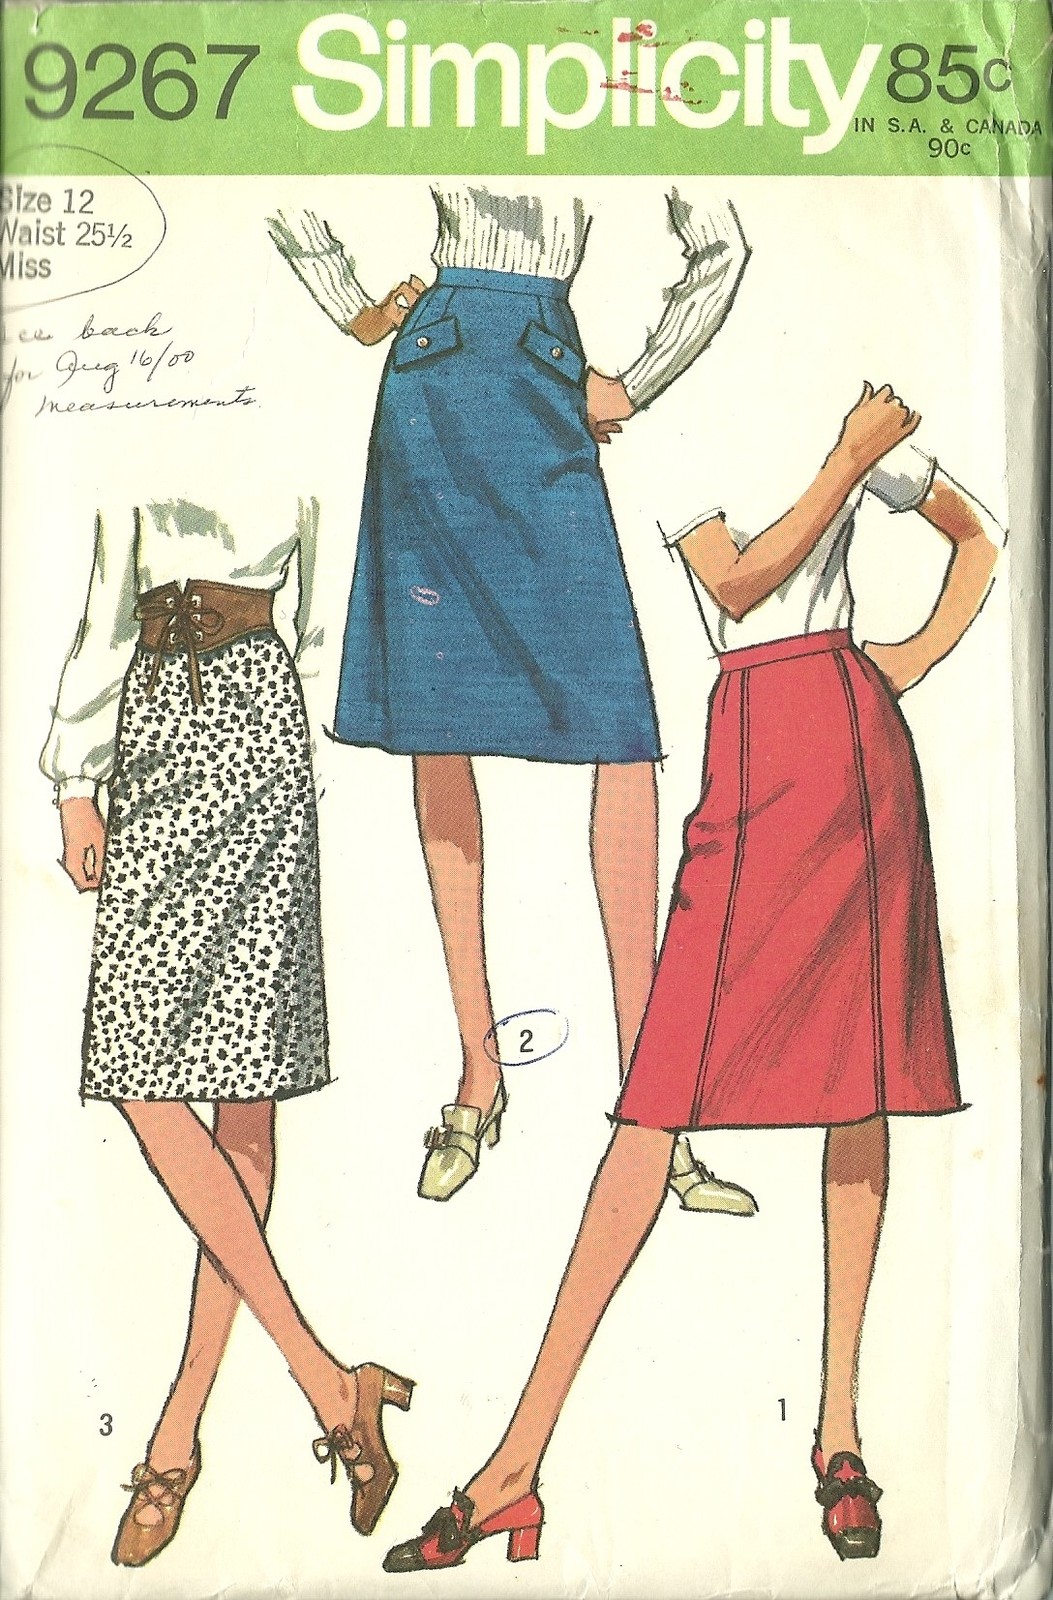 Simplicity Sewing Pattern 9267 Misses Womens Skirt Size 12 Used 1971 - $6.98